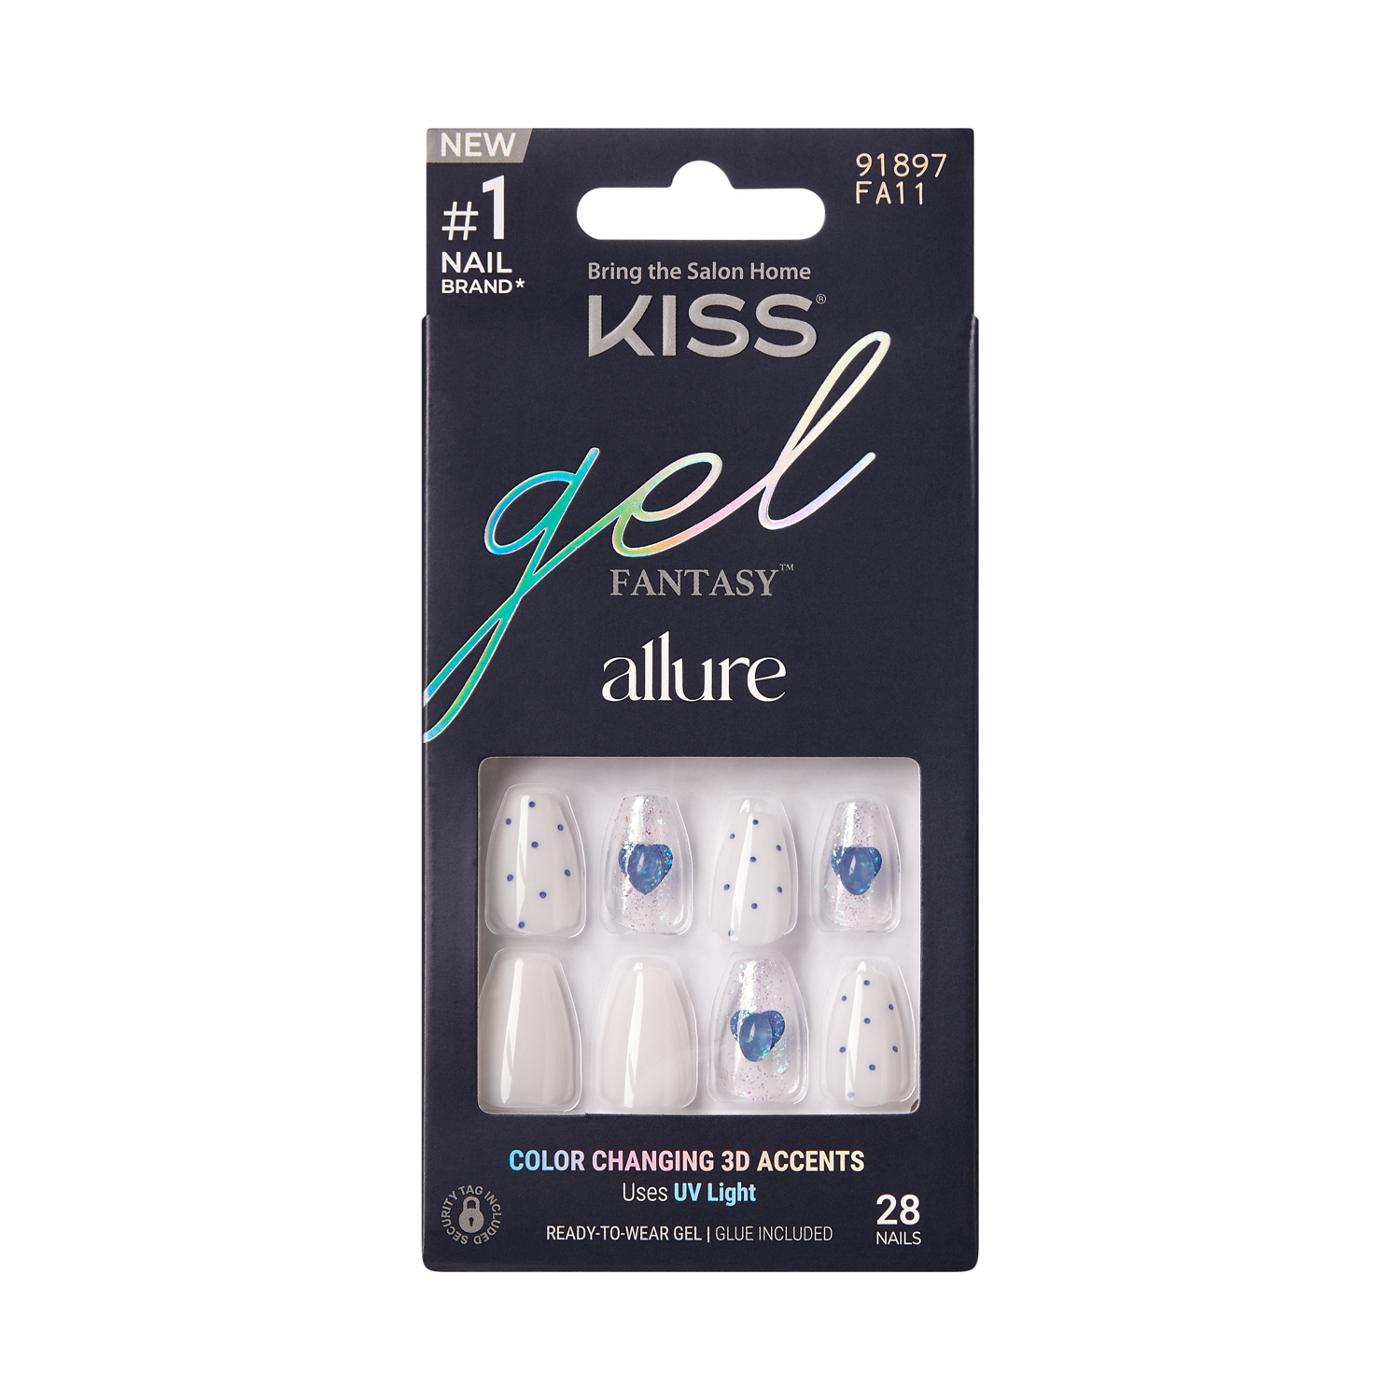 KISS Gel Fantasy Allure Press-On Manicure - Hottiest Thing; image 1 of 6